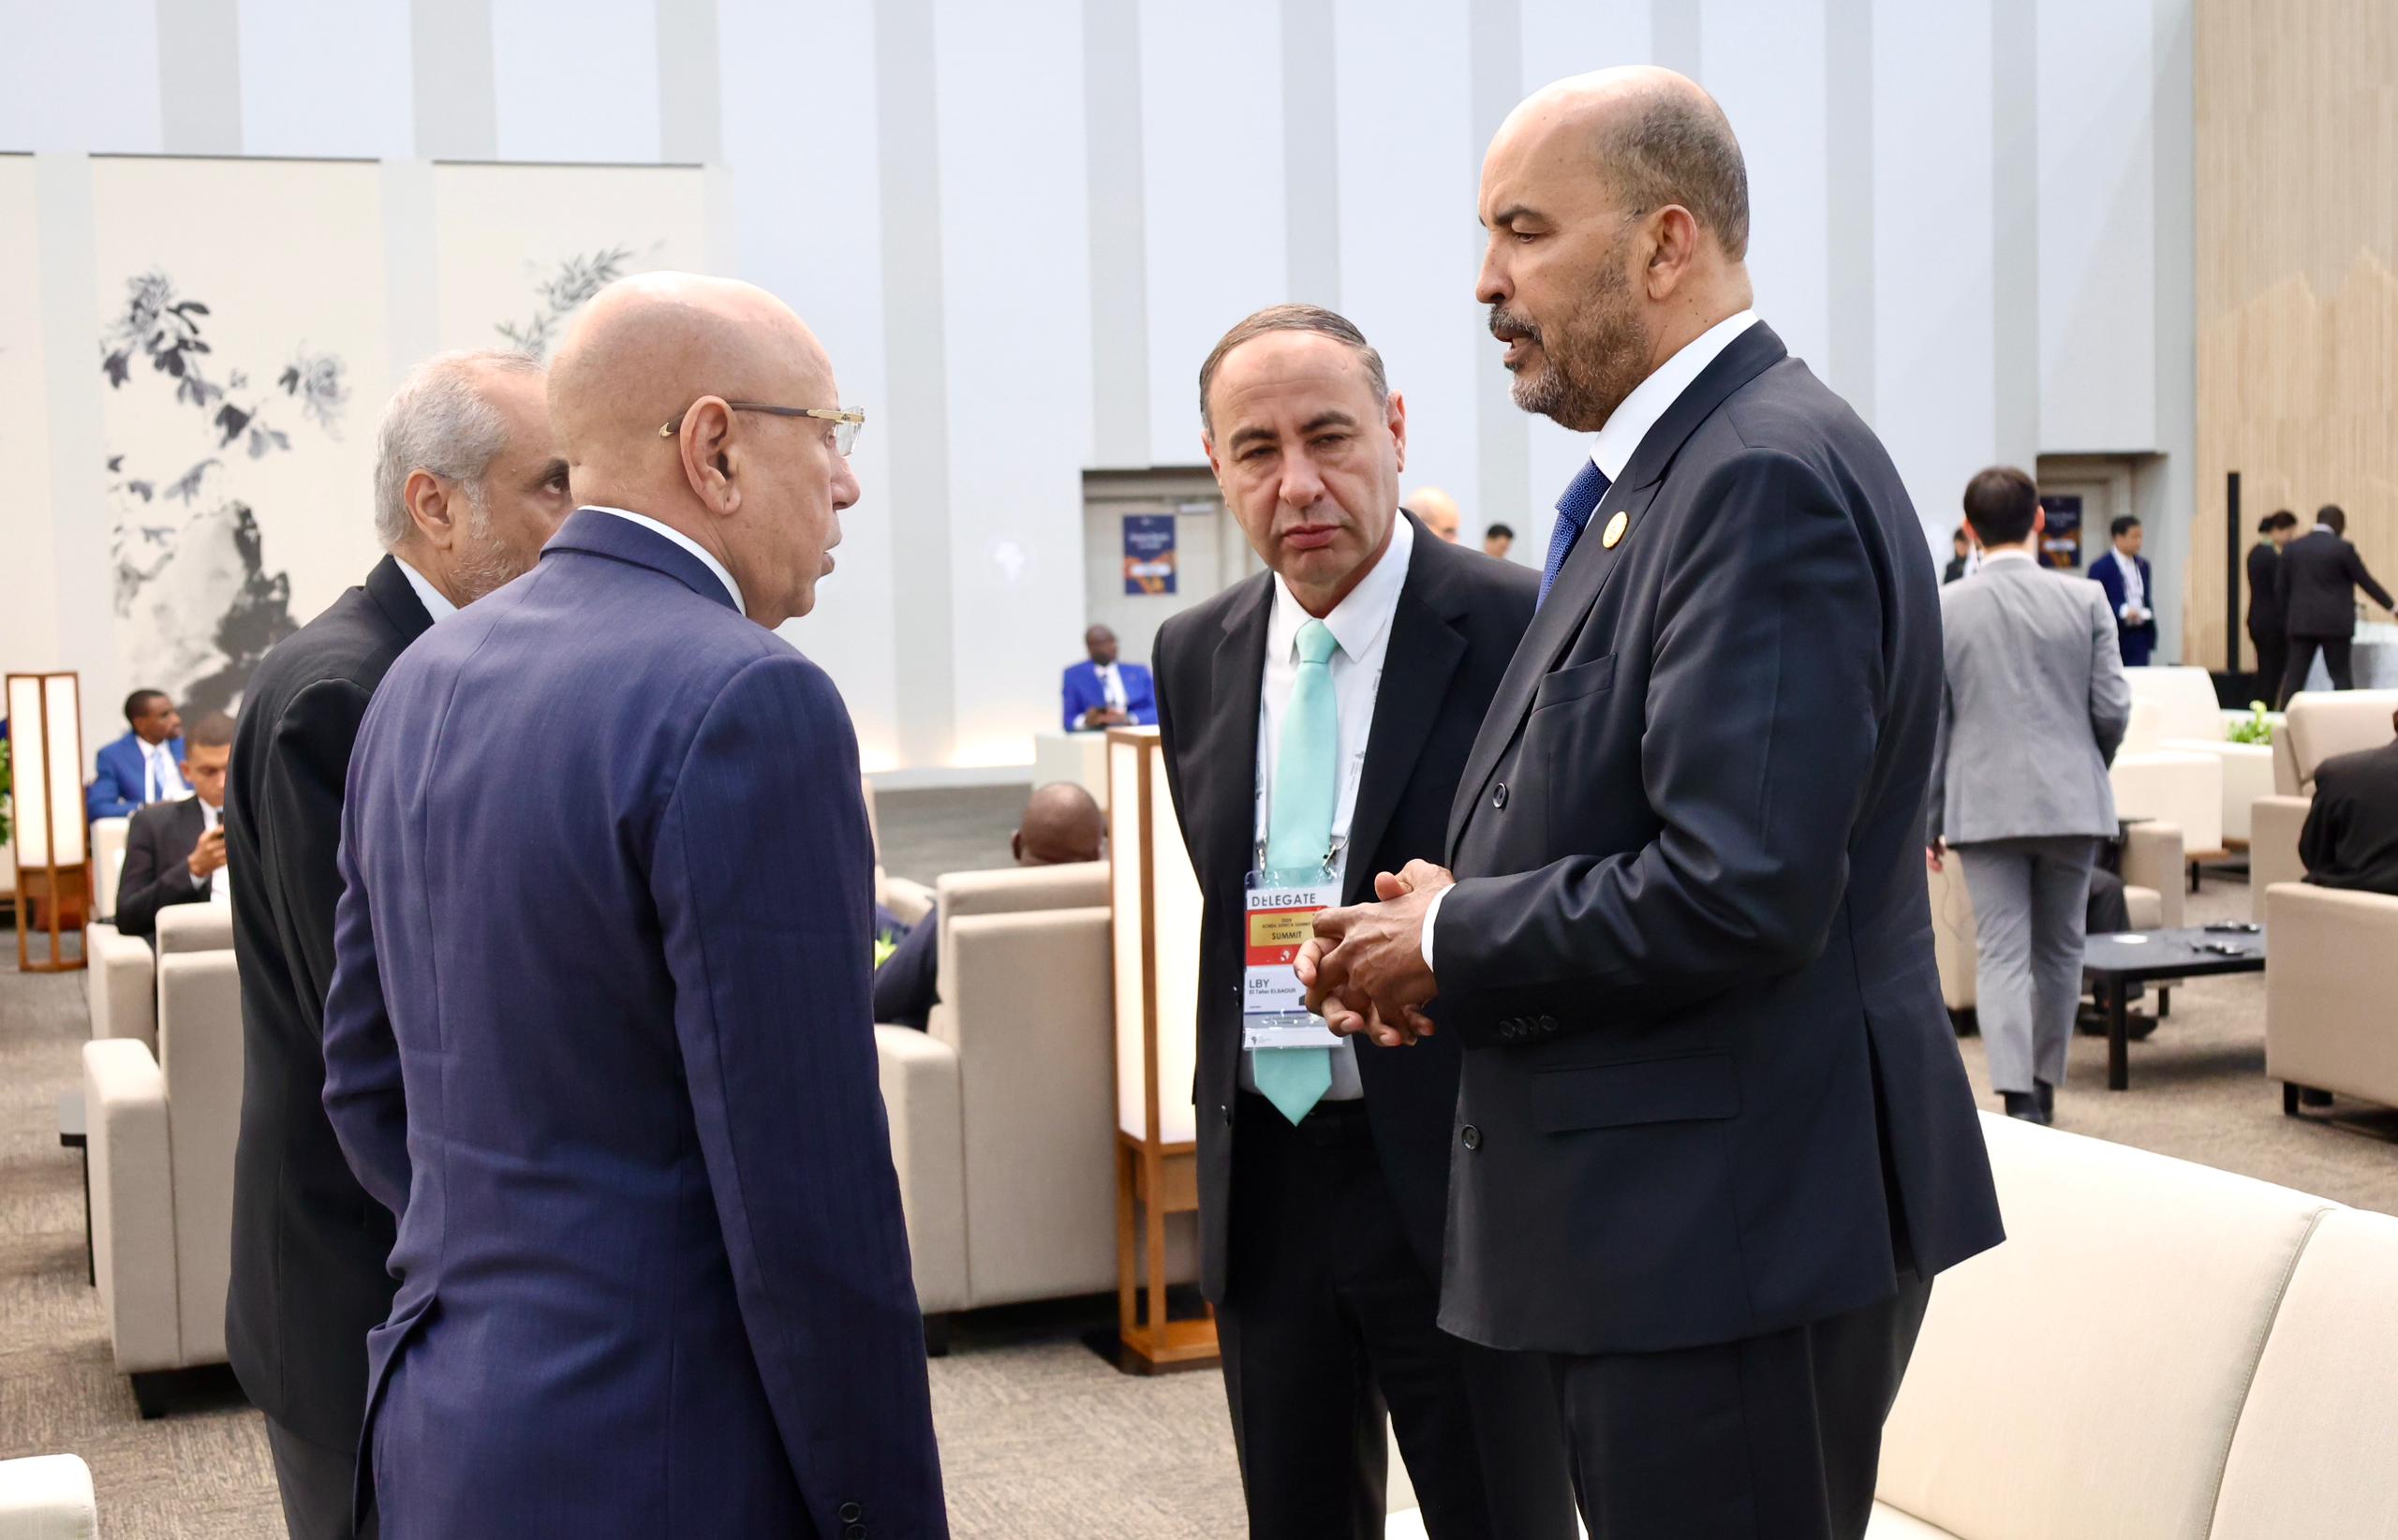 Al-Koni meets with the President of the Republic of Mauritania and the Chairman of the African Union on the sidelines of the Africa-Korea Summit.